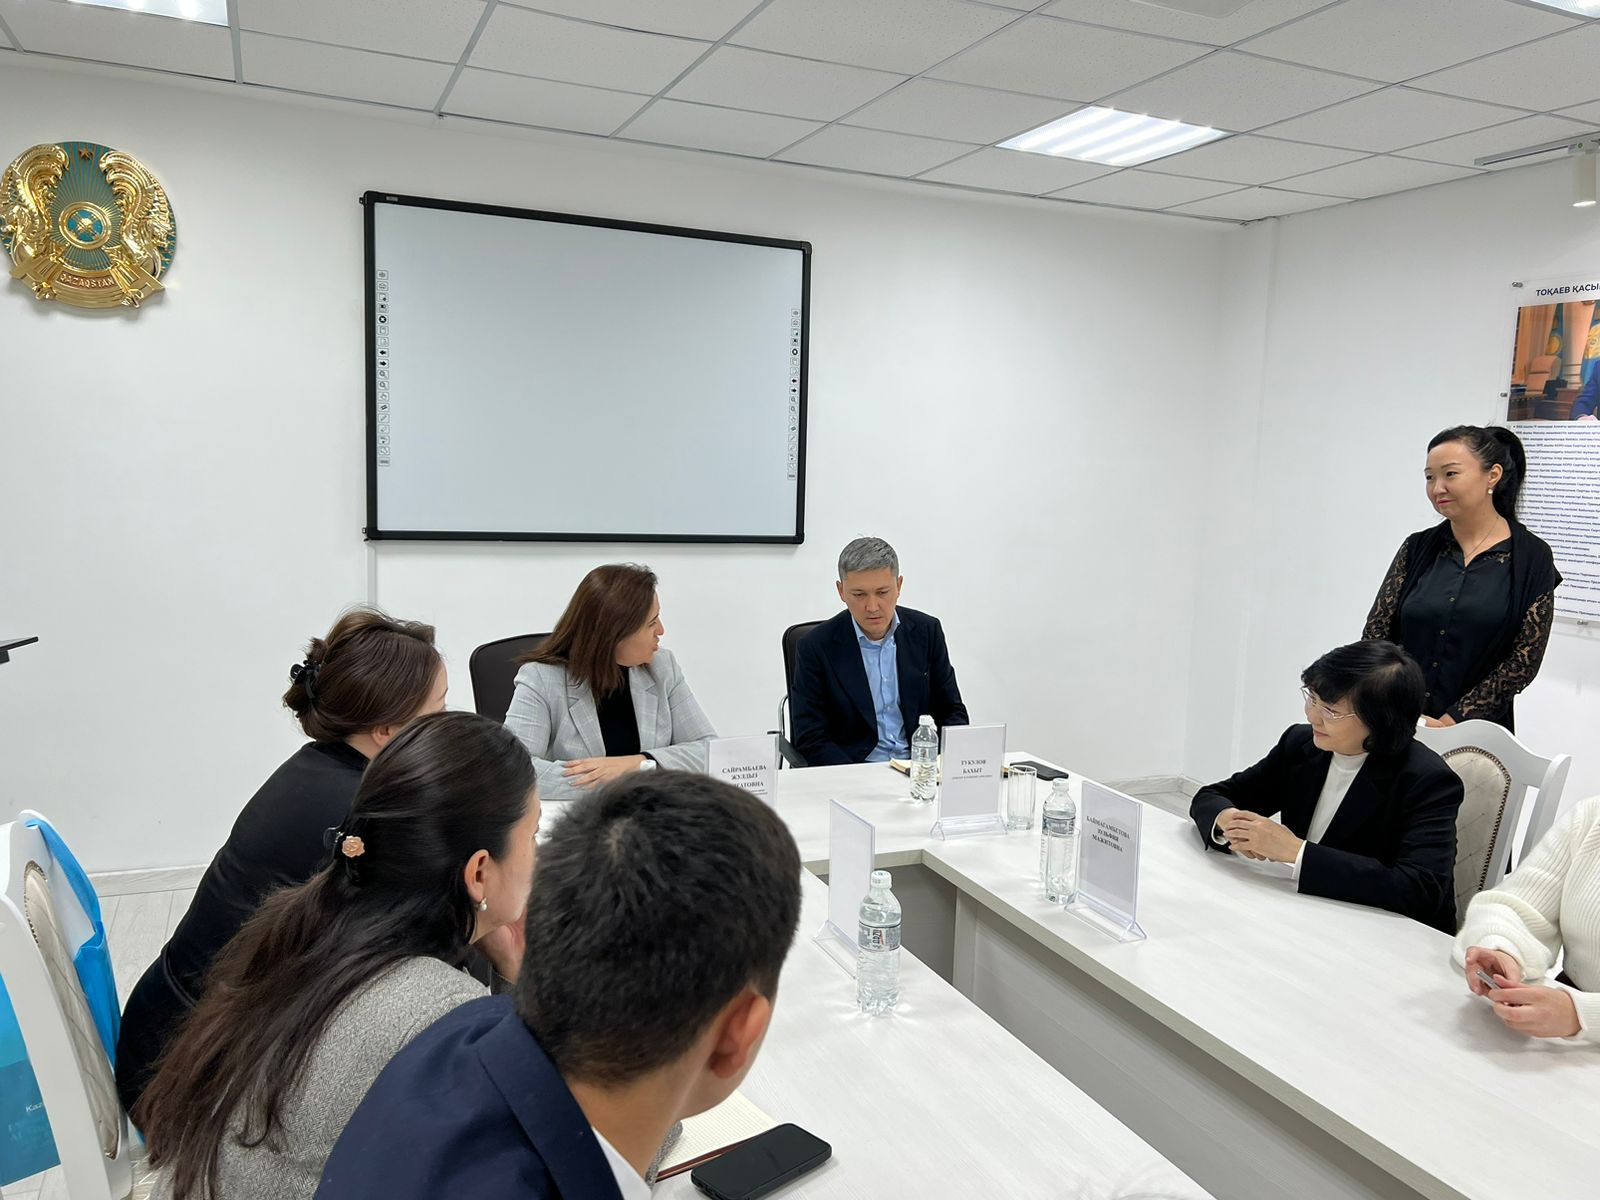 A guest lecture with Bakhyt Tukulov on the topic “The success story of the first Kazakh law firm that specializes in dispute resolution.”